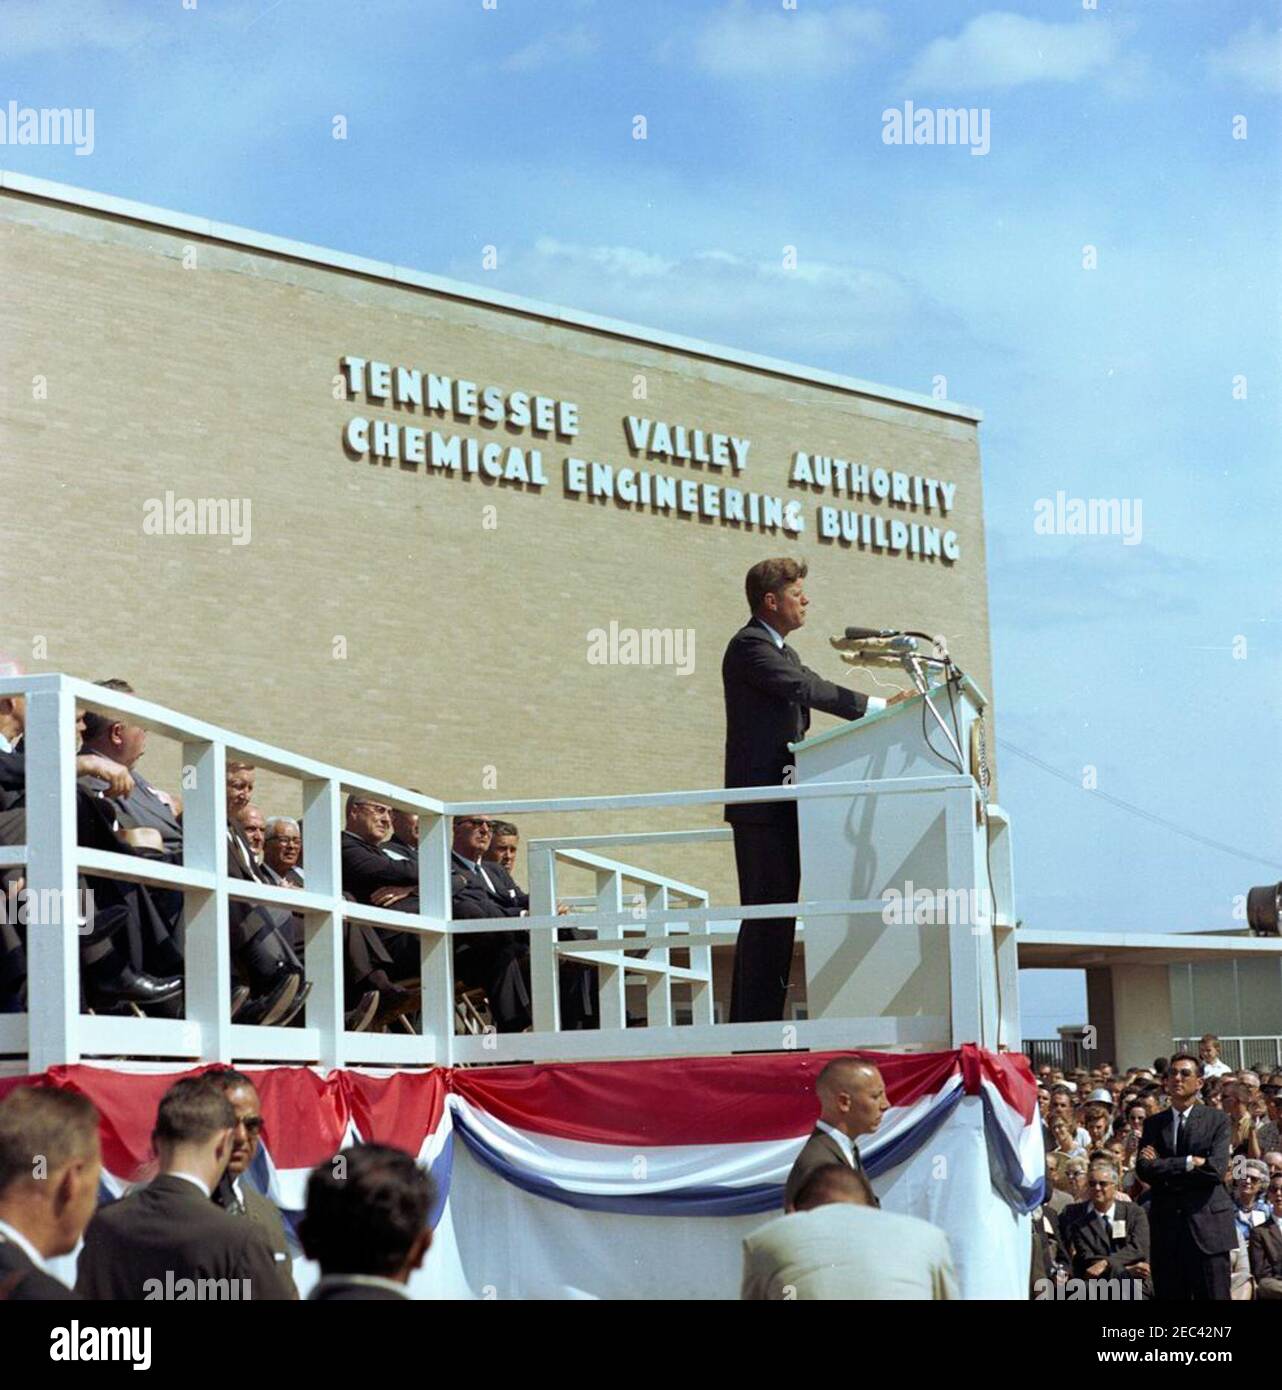 Trip to Tennessee and Alabama: Arrival at Muscle Shoals, Alabama, and Address at the 30th Anniversary celebration of the Tennessee Valley Authority (TVA). President John F. Kennedy (right, at lectern) delivers an address from the speakersu0027 platform in front of the Tennessee Valley Authorityu0027s (TVA) Chemical Engineering Building at a celebration commemorating the 30th anniversary of the TVA. Those seated on the platform include: Senator Lister Hill (Alabama); Governor of Alabama George C. Wallace; Frank E. Smith, member of the TVA Board; Aubrey J. u201cRedu201d Wagner, Chairman of t Stock Photo